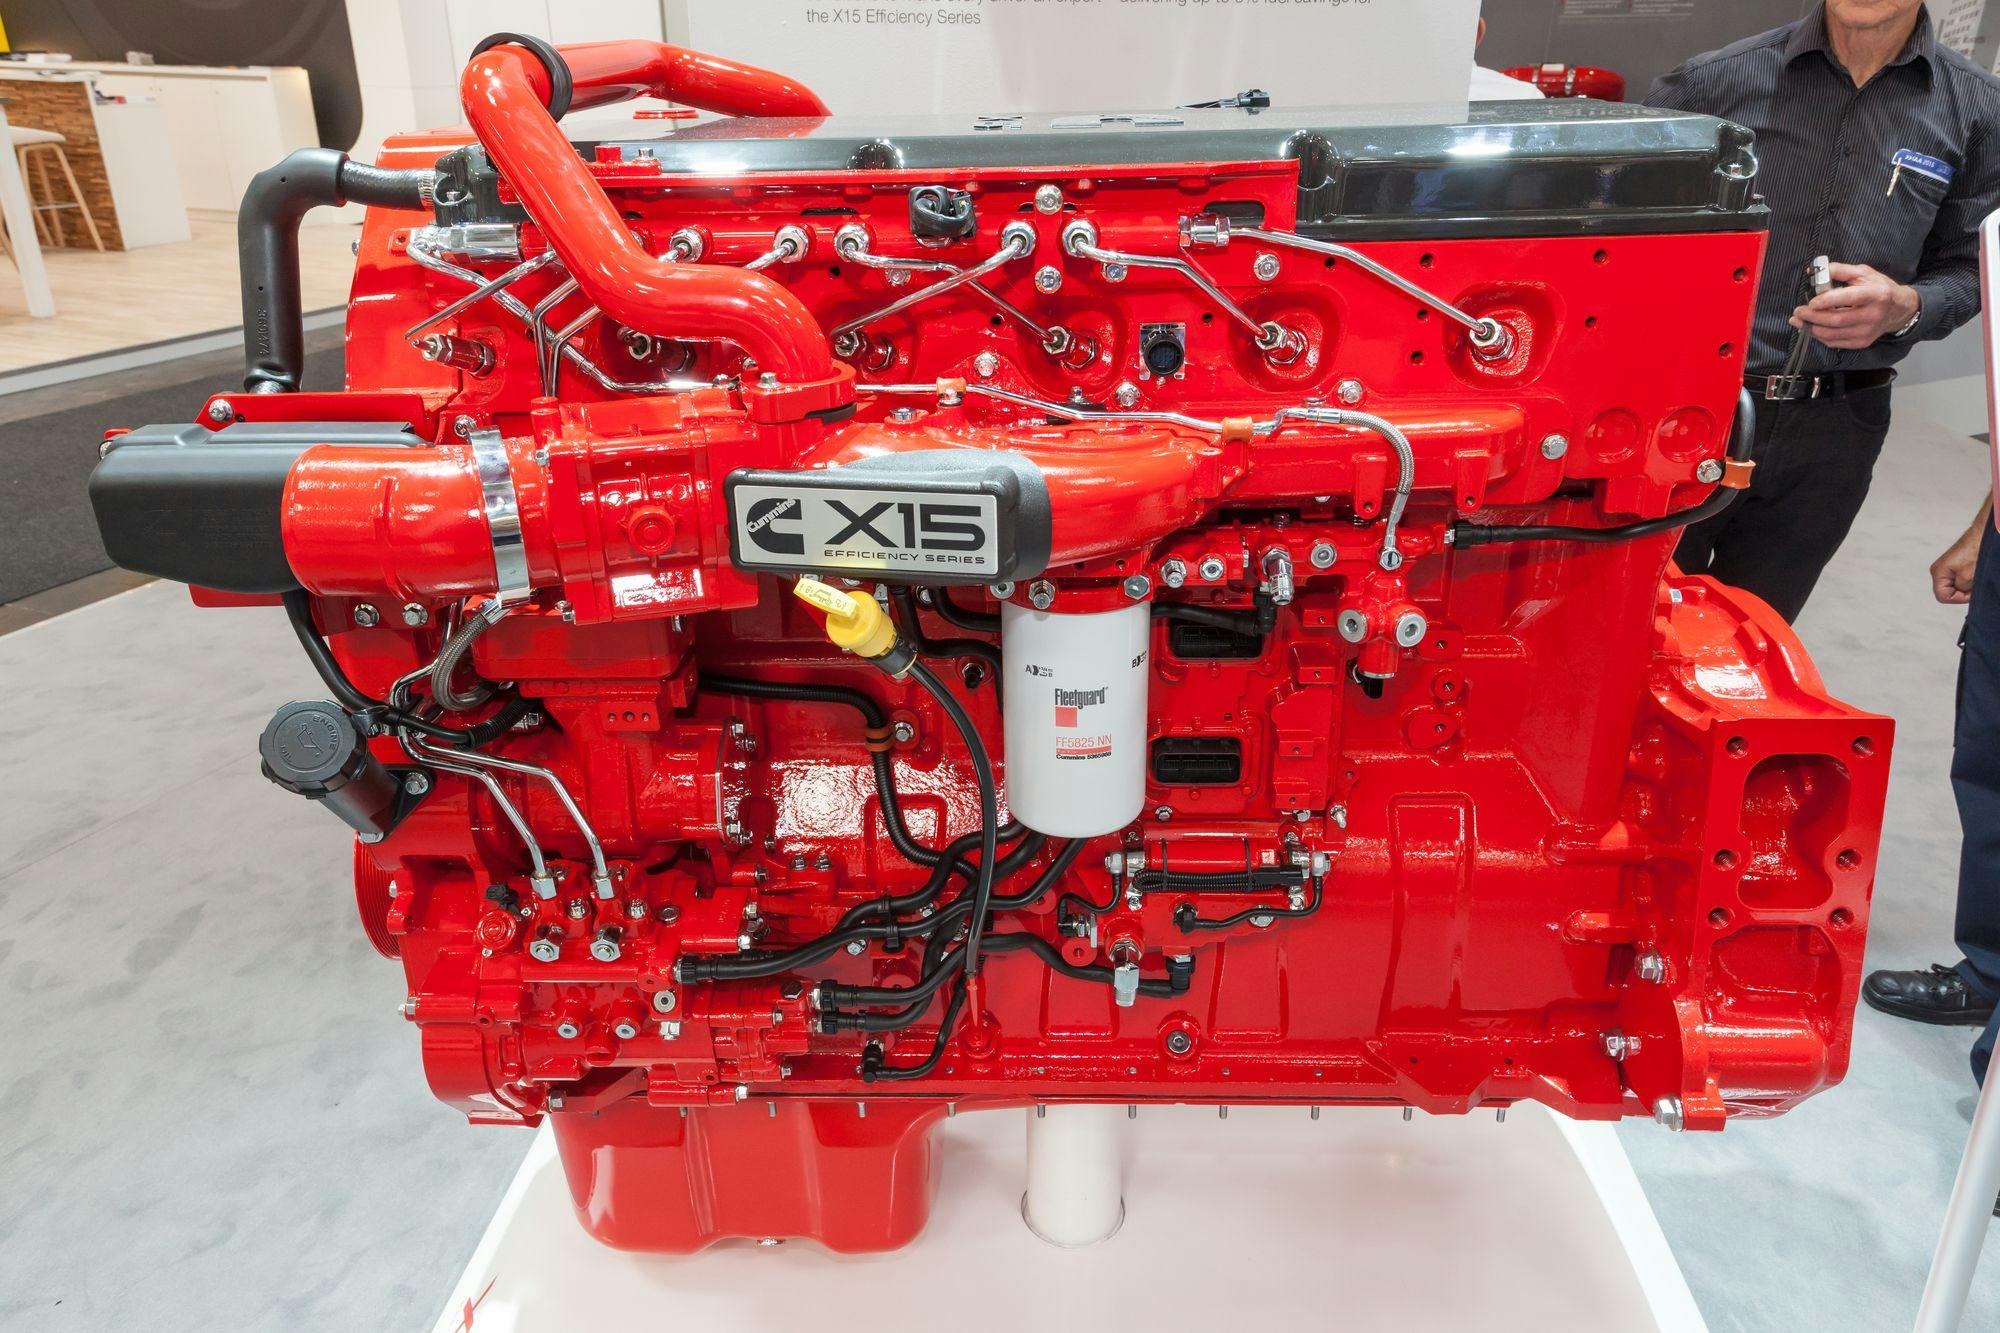 Join us in exploring Cummins and Detroit diesel engines. Understand their unique features, maintenance needs, and future trends in our upcoming series.